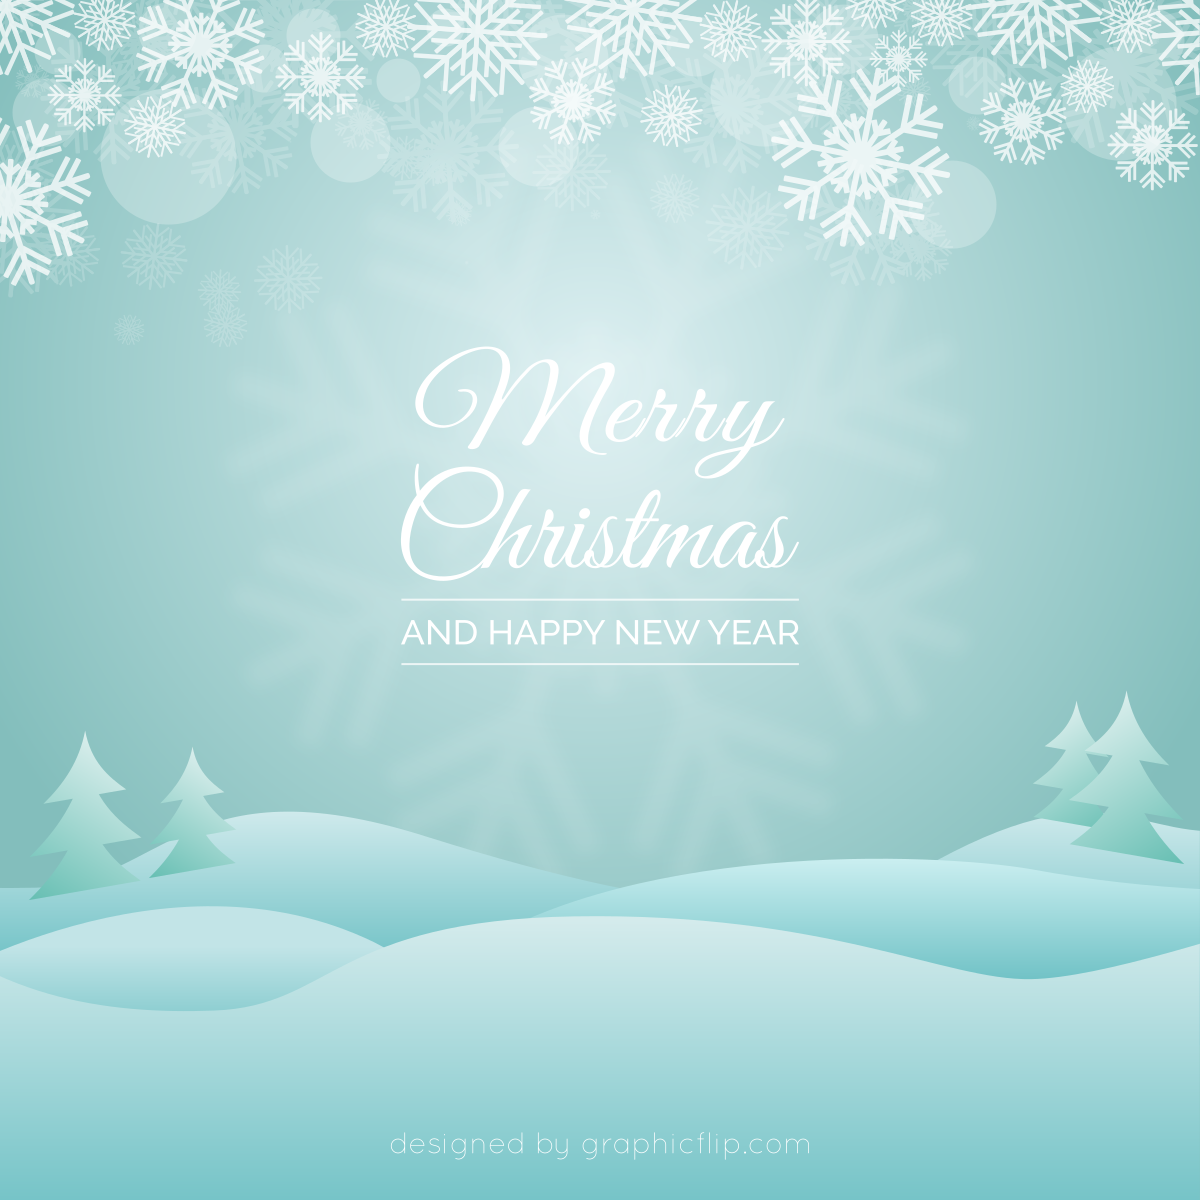 Free Download: Christmas Greeting Vector with Snowy 